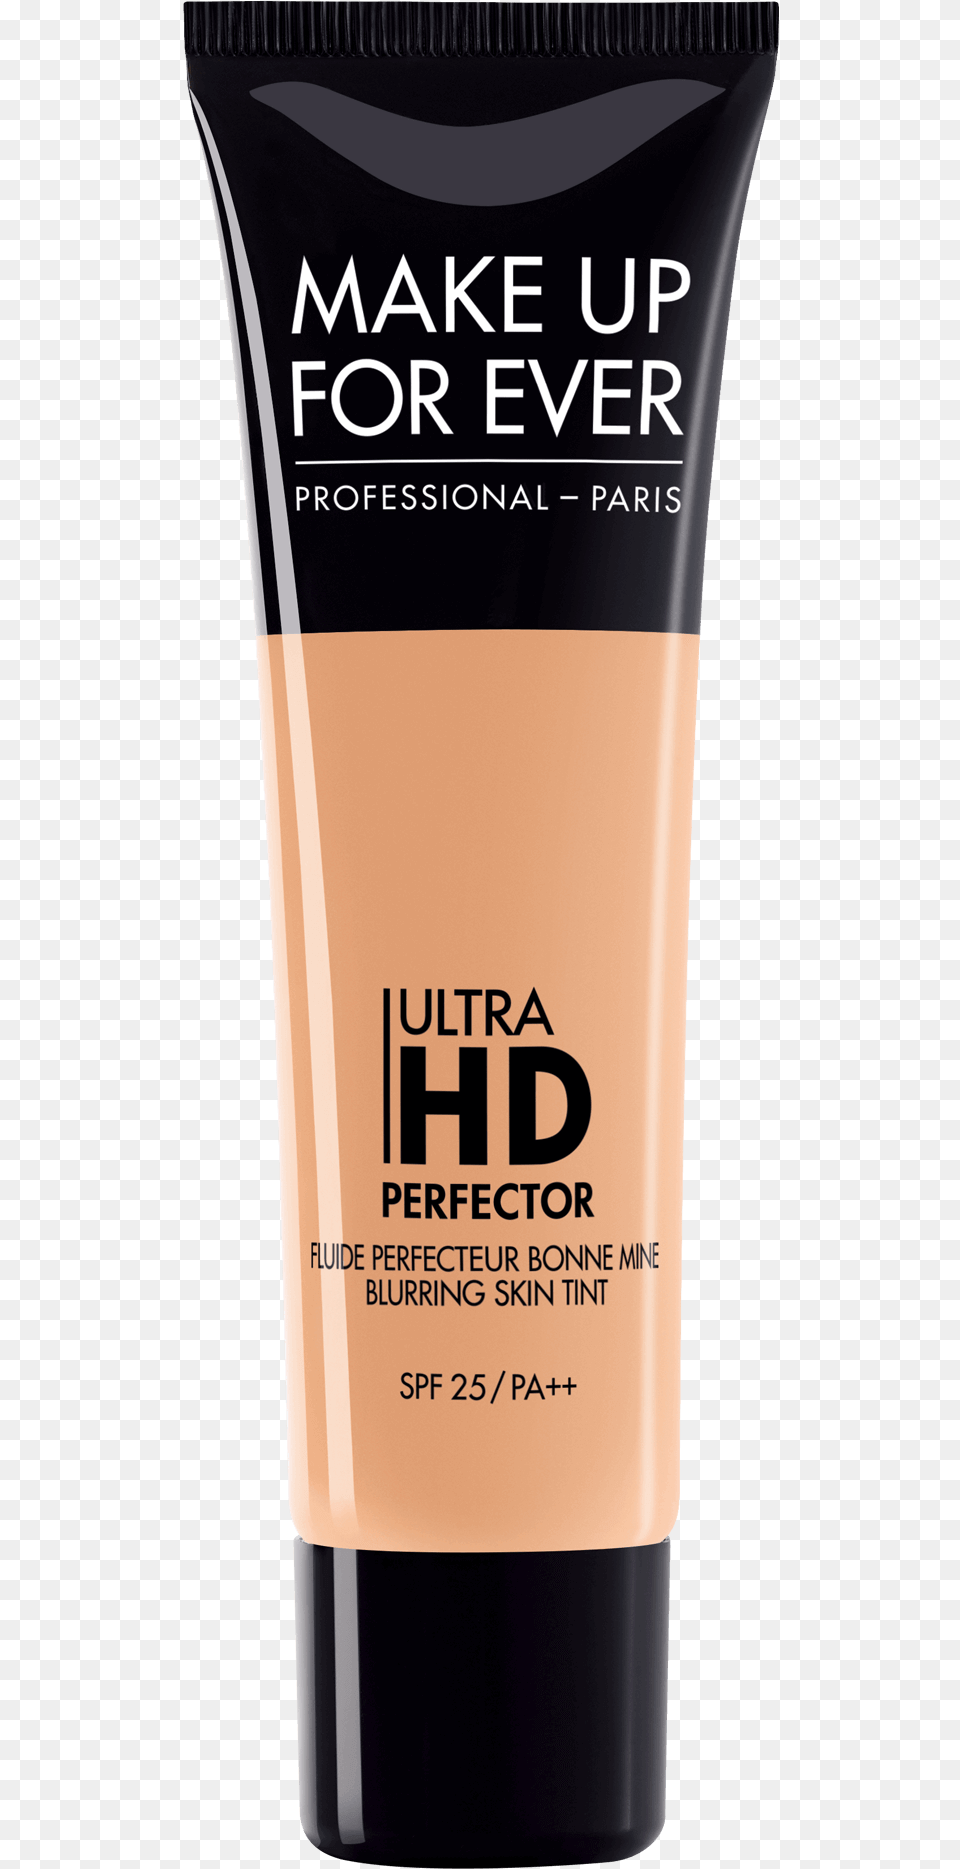 Loreal Infallible Foundation Matte, Bottle, Cosmetics, Aftershave, Sunscreen Png Image